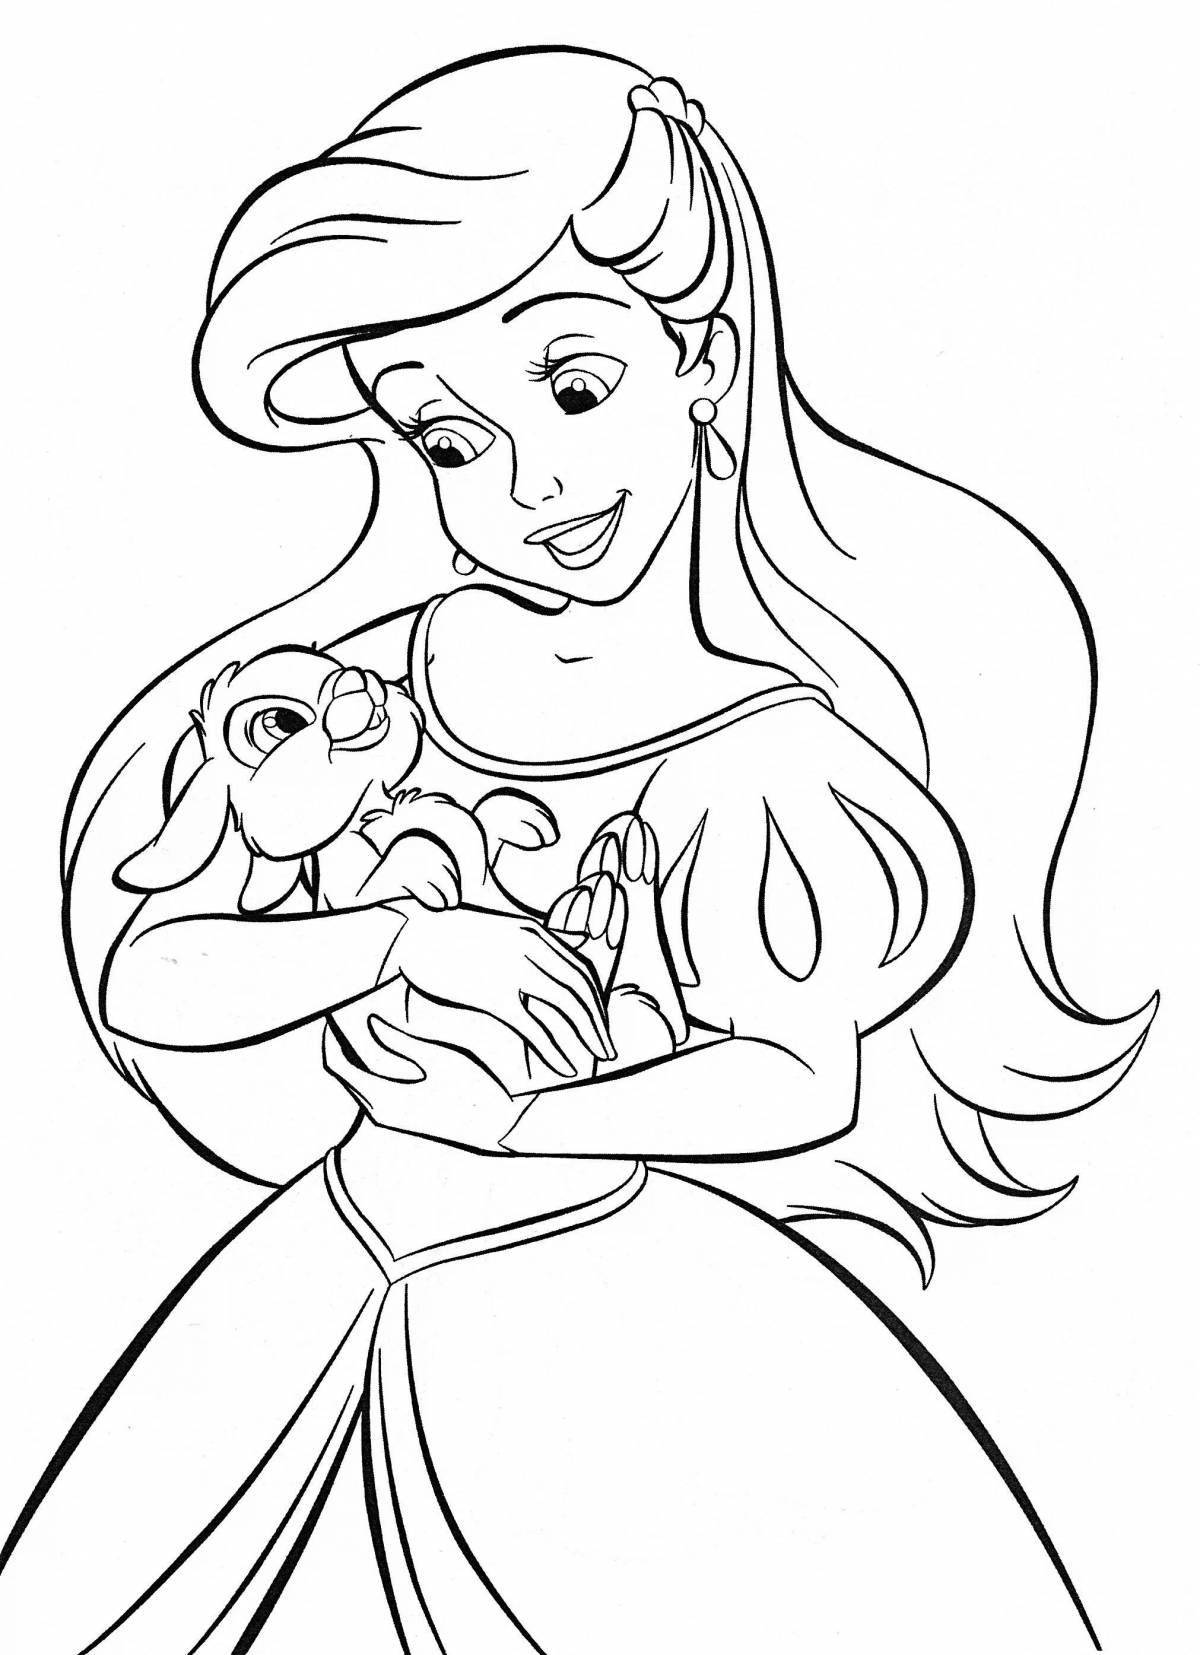 Beautiful coloring book for kids with Disney princesses